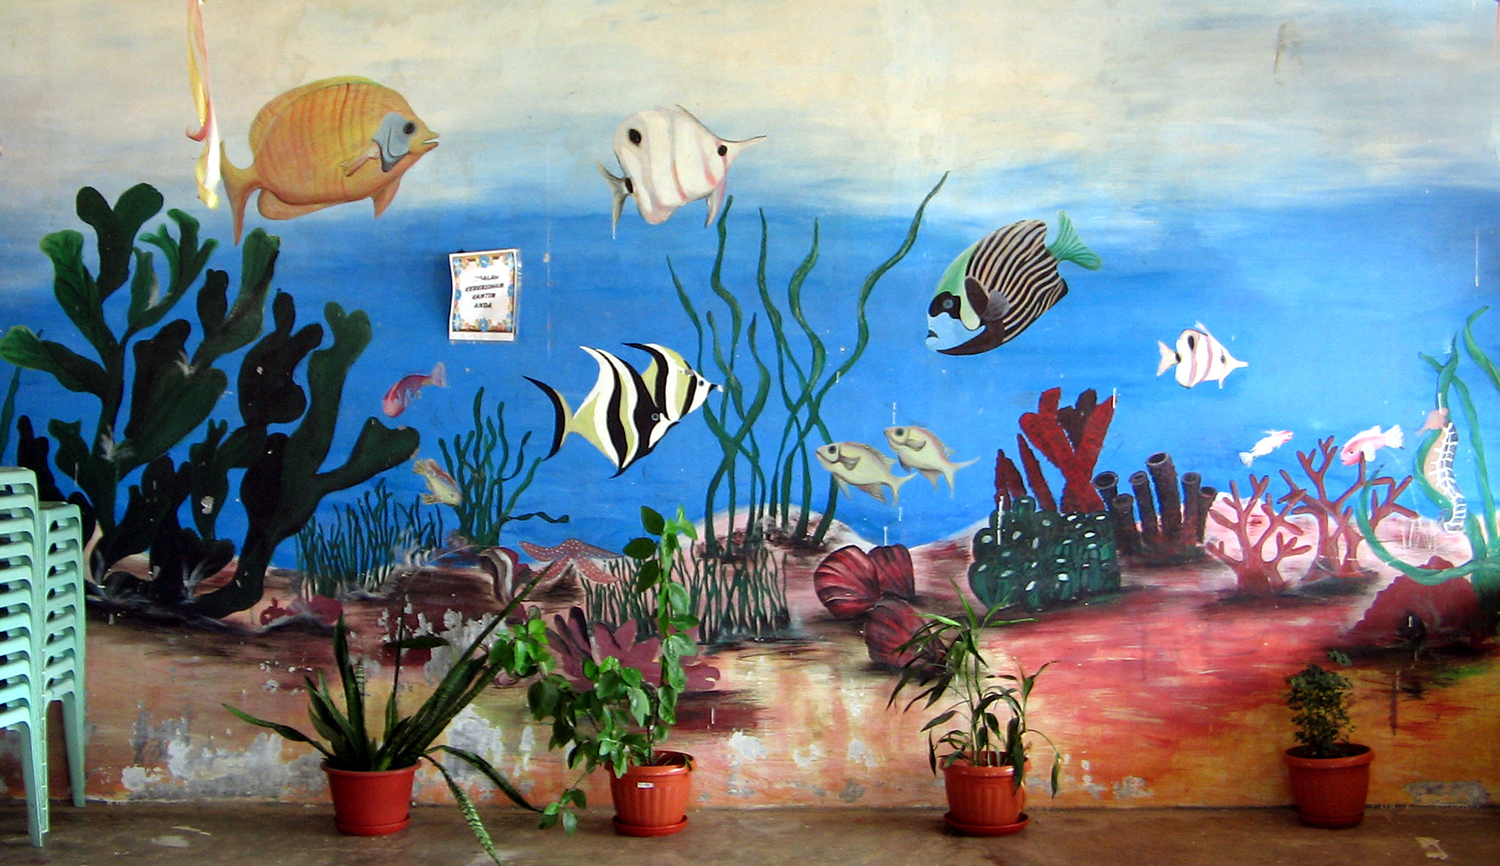 "Marine life" painting on the wall of school canteen of   SMK Balung in Sabah